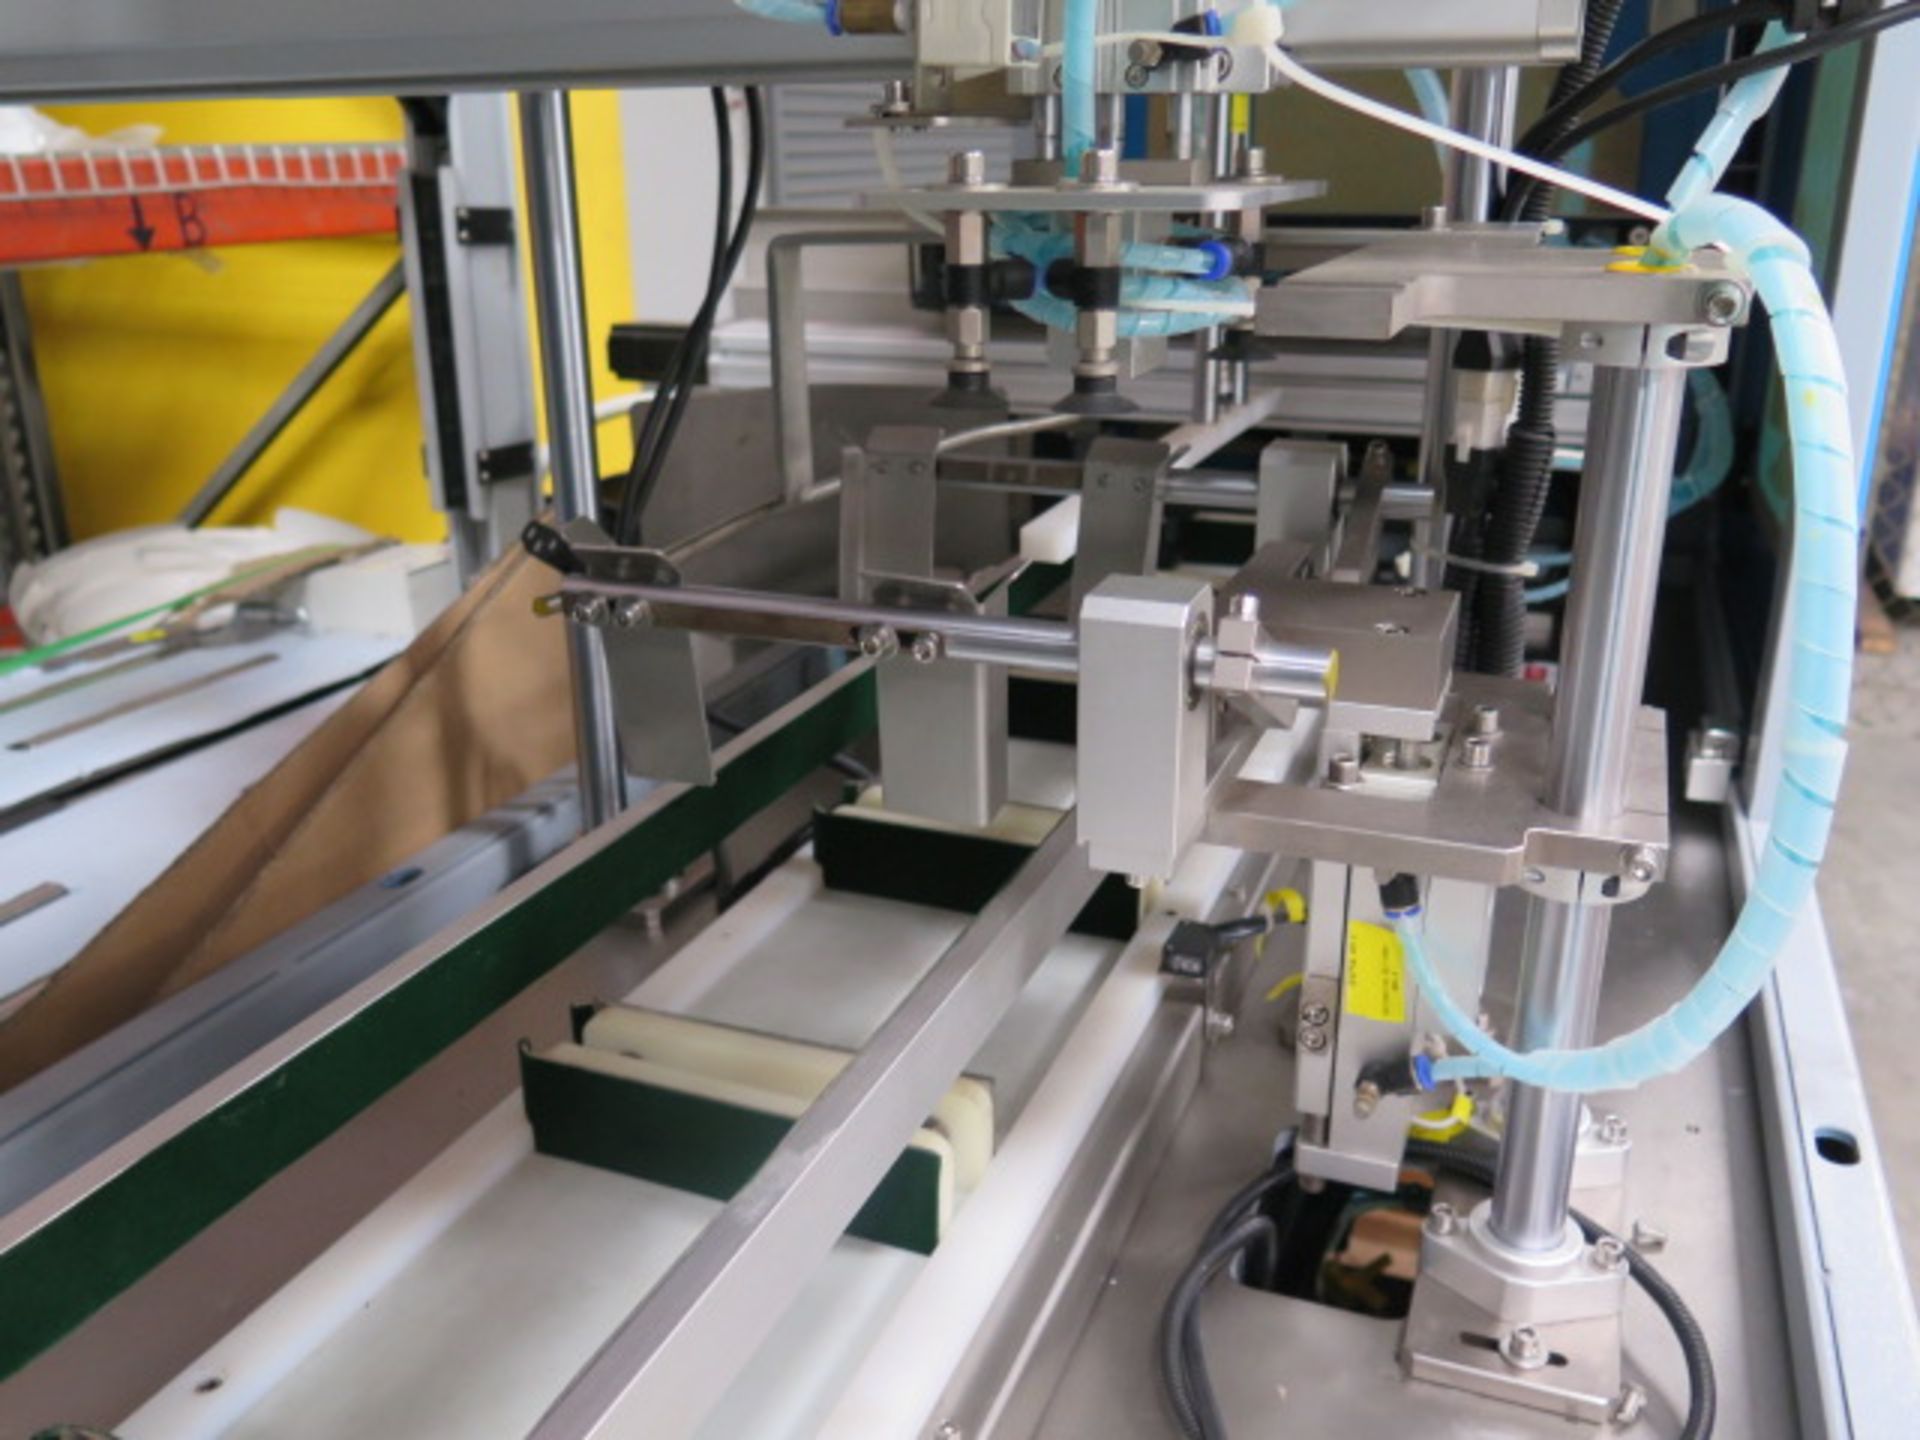 2021 (NEW) Rongyu Robotic Packaging Machine w/ HSR-BR616 6-Axis Robotic Manipulator, SOLD AS IS - Image 33 of 46